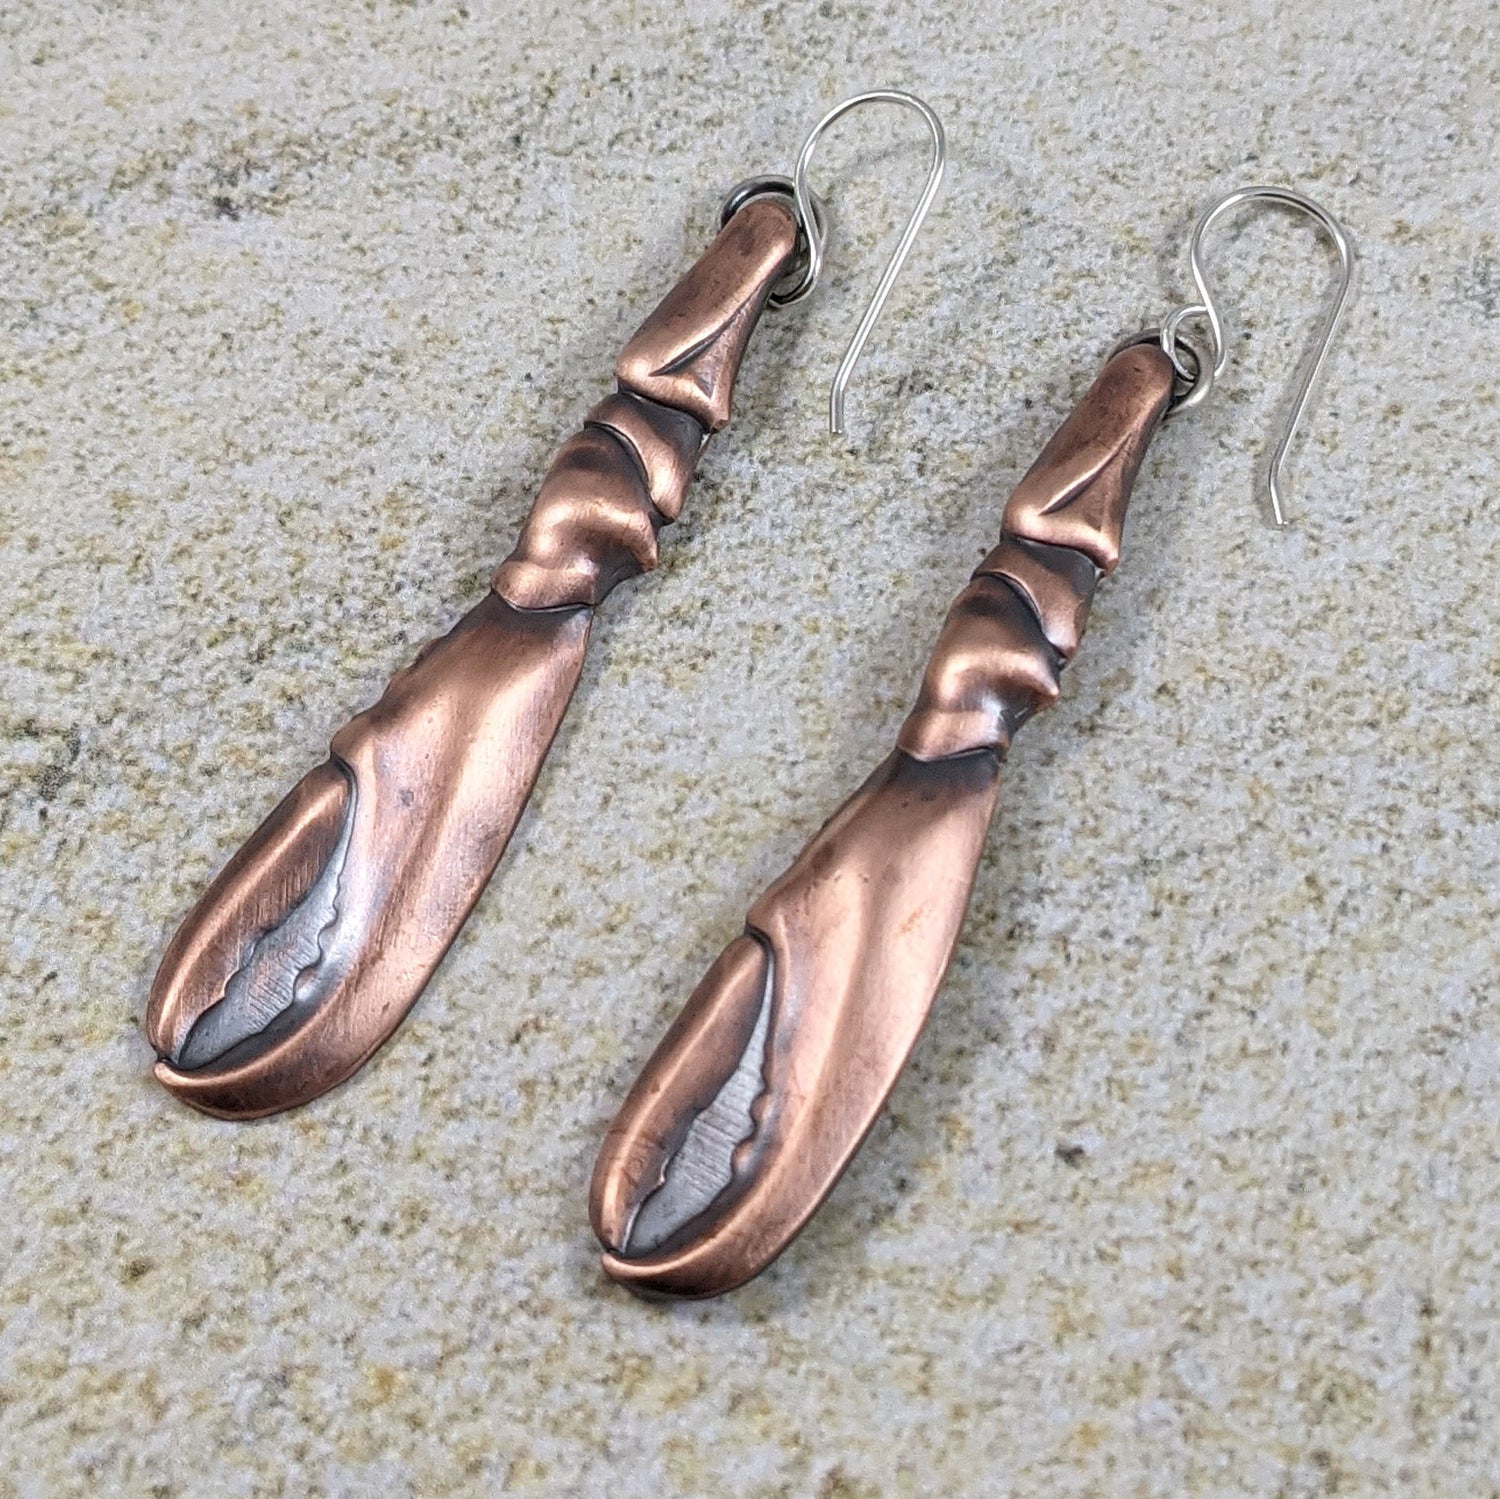 Copper earrings in the shape of a lobster claw. The claws are three dimensional and are on sterling silver ear wires. Posed on a sandy background.